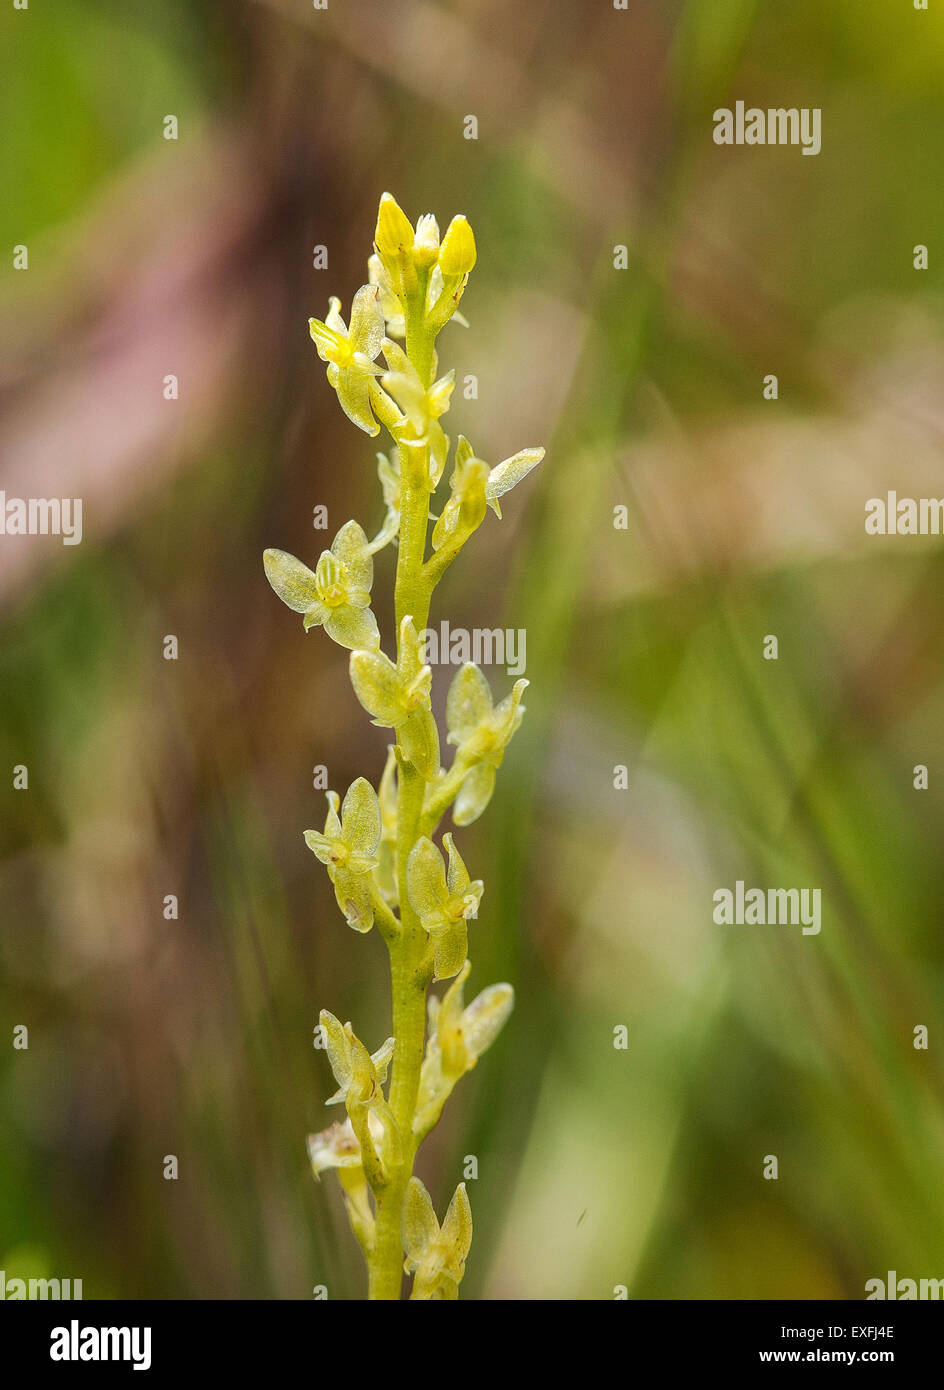 Bog or Adder's Mouth Orchid Hammarbya palludosa flower spike growing in lowland marsh in the New Forest Hampshire UK Stock Photo